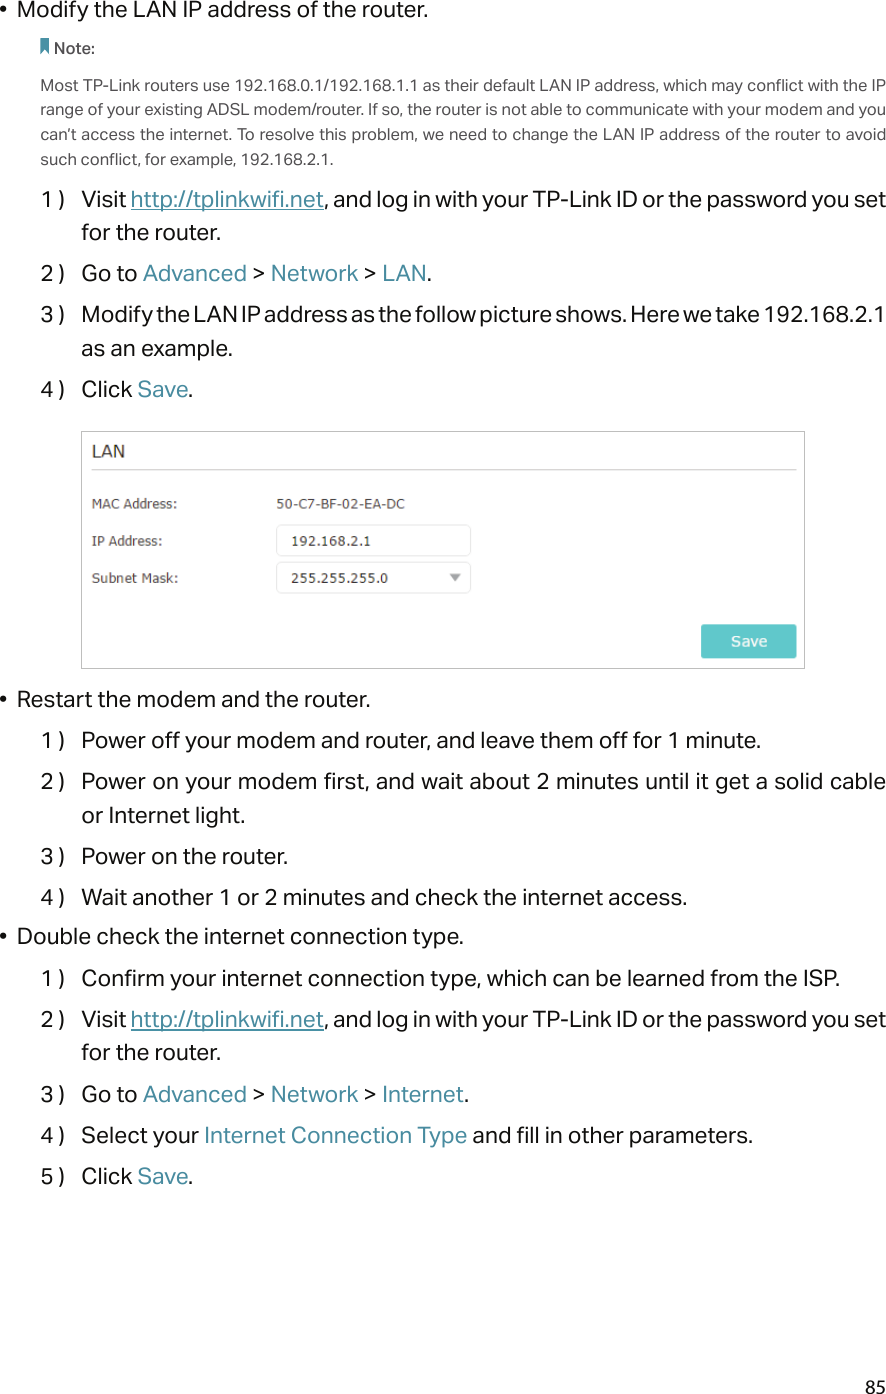 85•  Modify the LAN IP address of the router.Note: Most TP-Link routers use 192.168.0.1/192.168.1.1 as their default LAN IP address, which may conflict with the IP range of your existing ADSL modem/router. If so, the router is not able to communicate with your modem and you can’t access the internet. To resolve this problem, we need to change the LAN IP address of the router to avoid such conflict, for example, 192.168.2.1. 1 )  Visit http://tplinkwifi.net, and log in with your TP-Link ID or the password you set for the router.2 )  Go to Advanced &gt; Network &gt; LAN.3 )  Modify the LAN IP address as the follow picture shows. Here we take 192.168.2.1 as an example.4 )  Click Save.•  Restart the modem and the router.1 )  Power off your modem and router, and leave them off for 1 minute.2 )  Power on your modem first, and wait about 2 minutes until it get a solid cable or Internet light.3 )  Power on the router.4 )  Wait another 1 or 2 minutes and check the internet access.•  Double check the internet connection type.1 )  Confirm your internet connection type, which can be learned from the ISP.2 )  Visit http://tplinkwifi.net, and log in with your TP-Link ID or the password you set for the router.3 )  Go to Advanced &gt; Network &gt; Internet.4 )  Select your Internet Connection Type and fill in other parameters.5 )  Click Save.